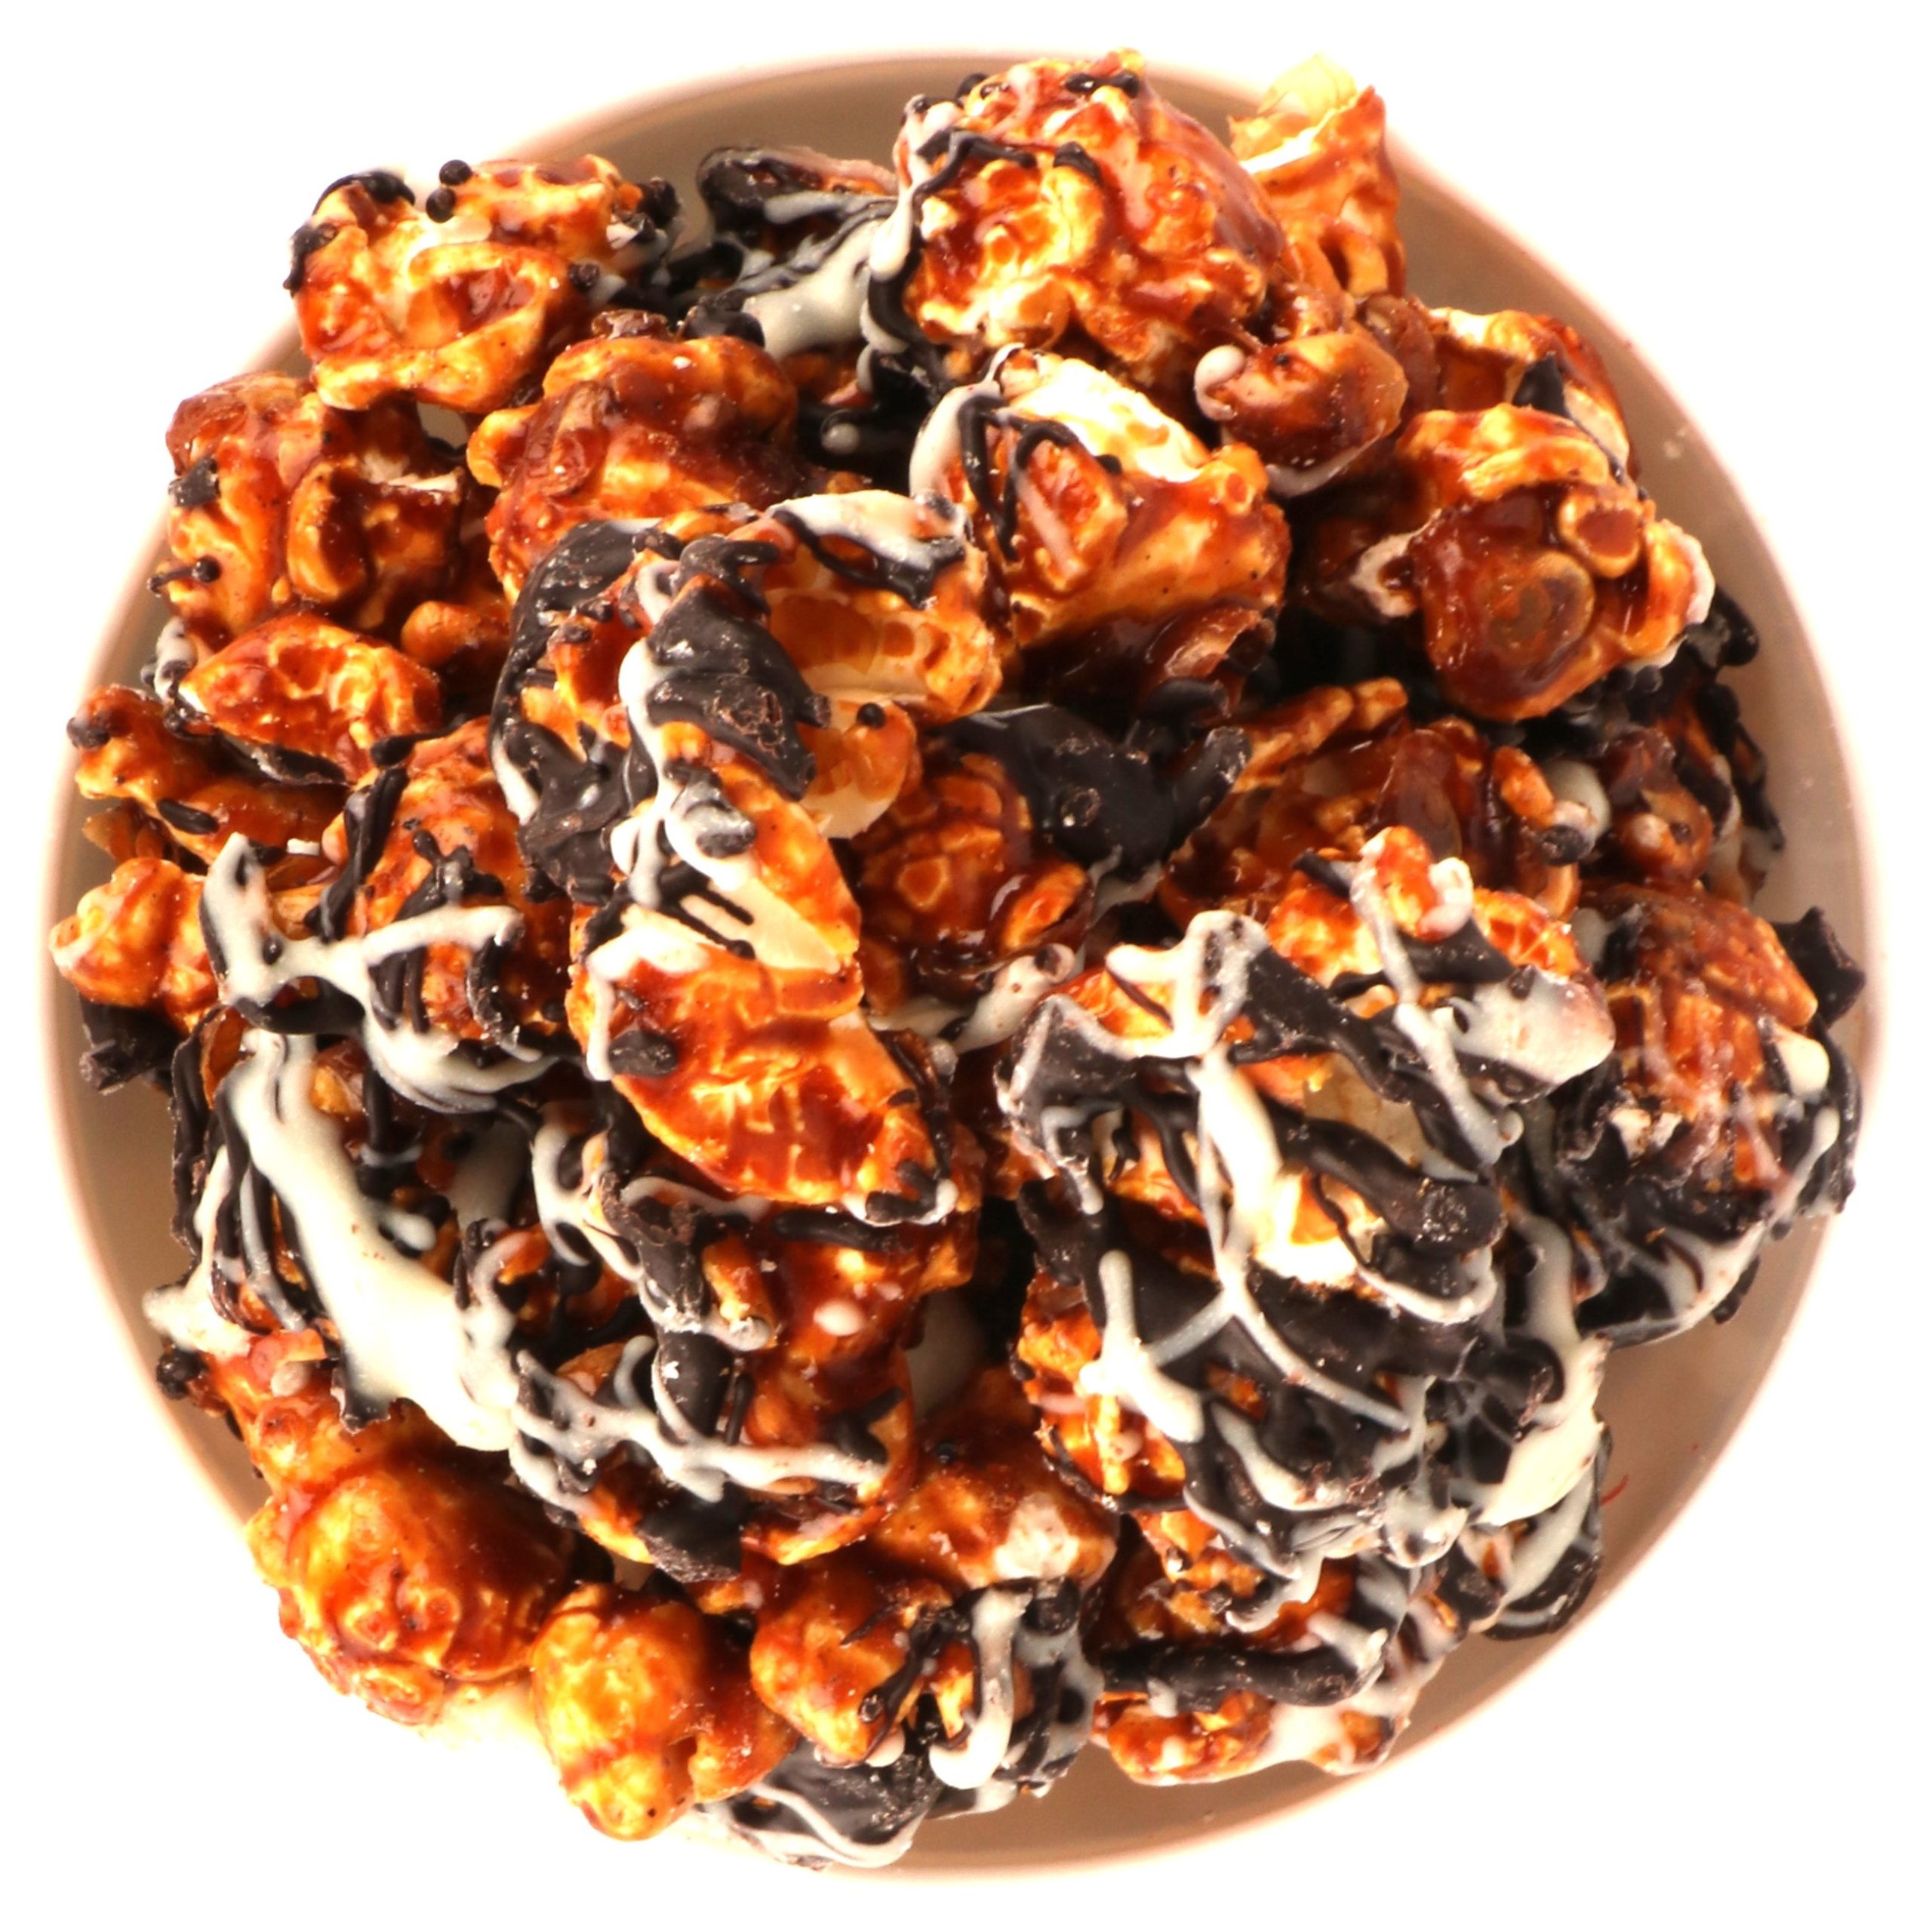 Pack of 4, Nutty Double Chocolate Caramel Popcorn-560g